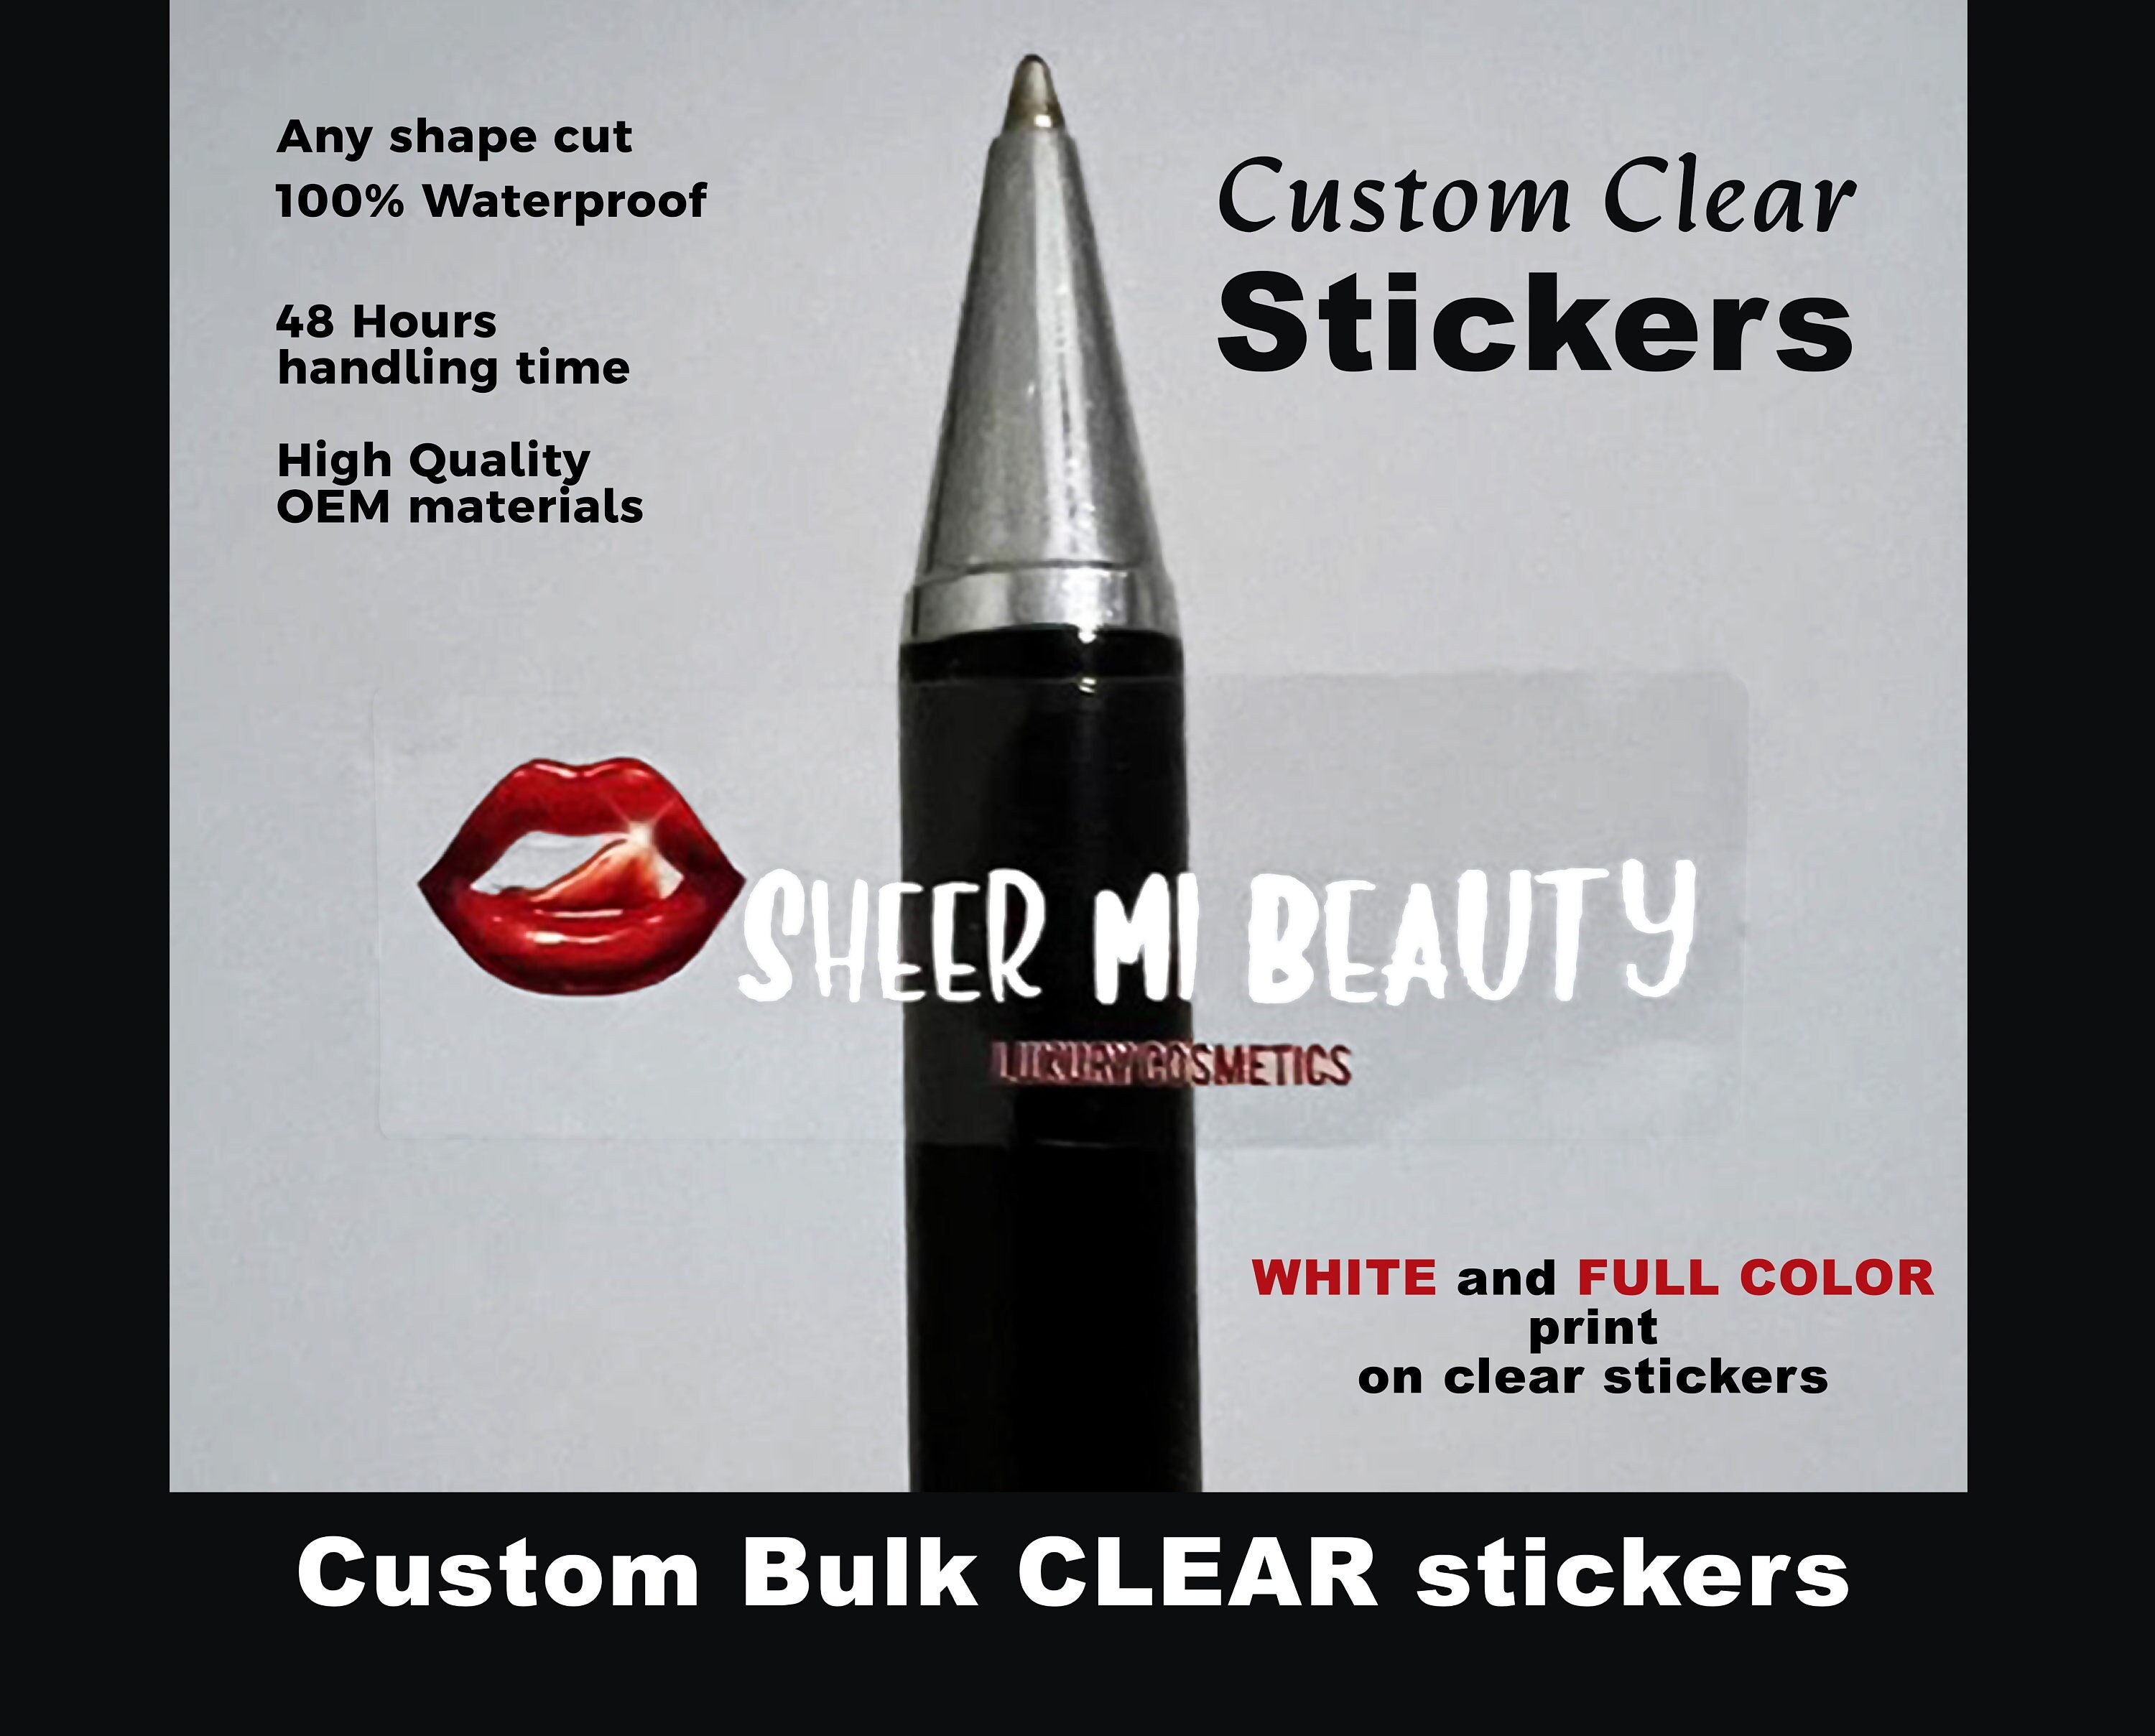 Clear stickers - Free shipping